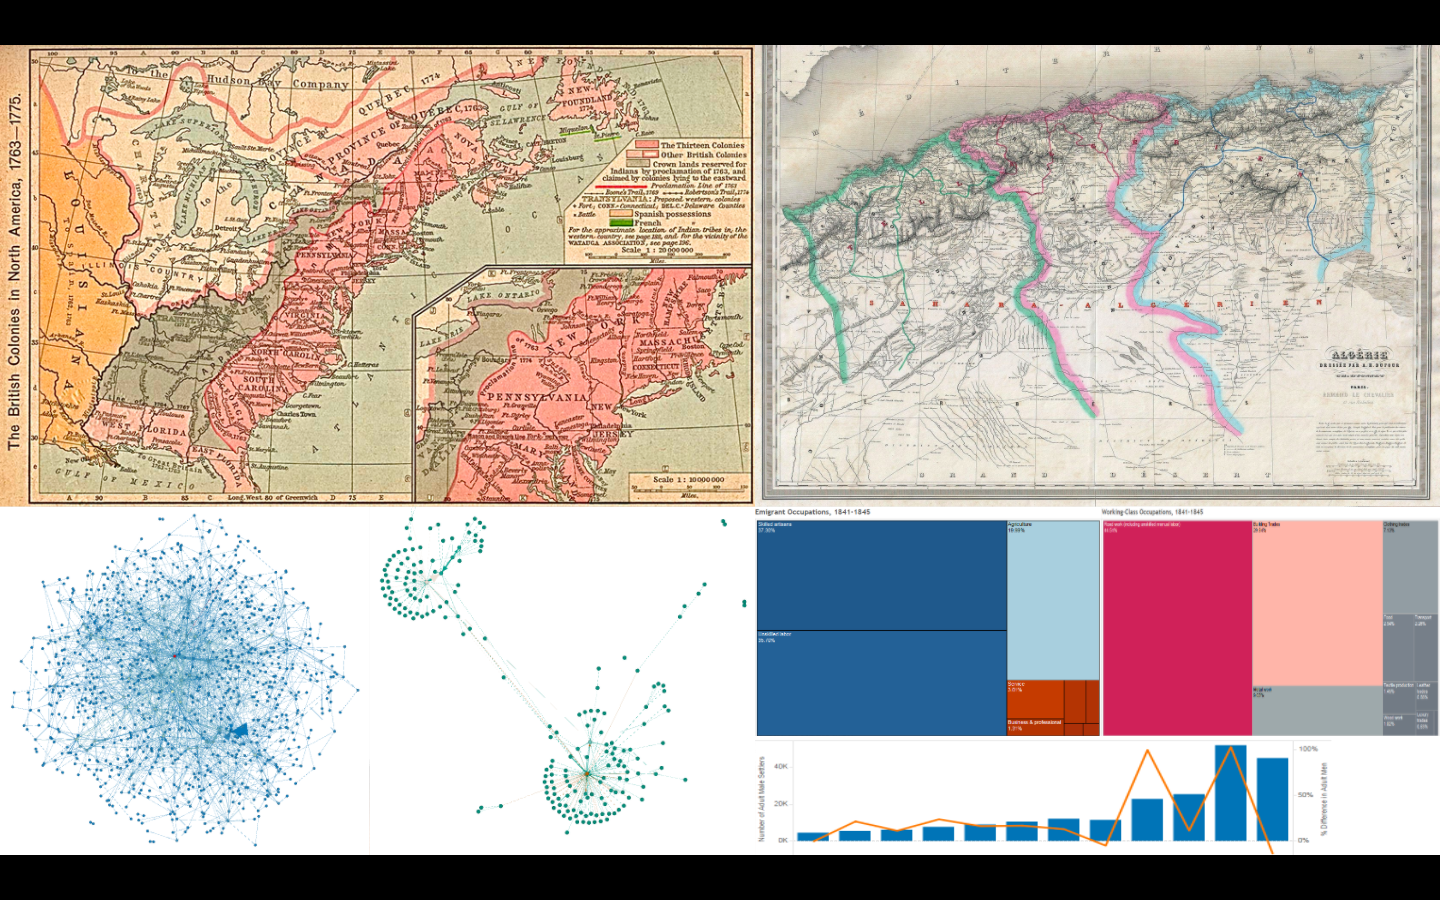 Historic maps of the United States and Algeria with network and data visualizations